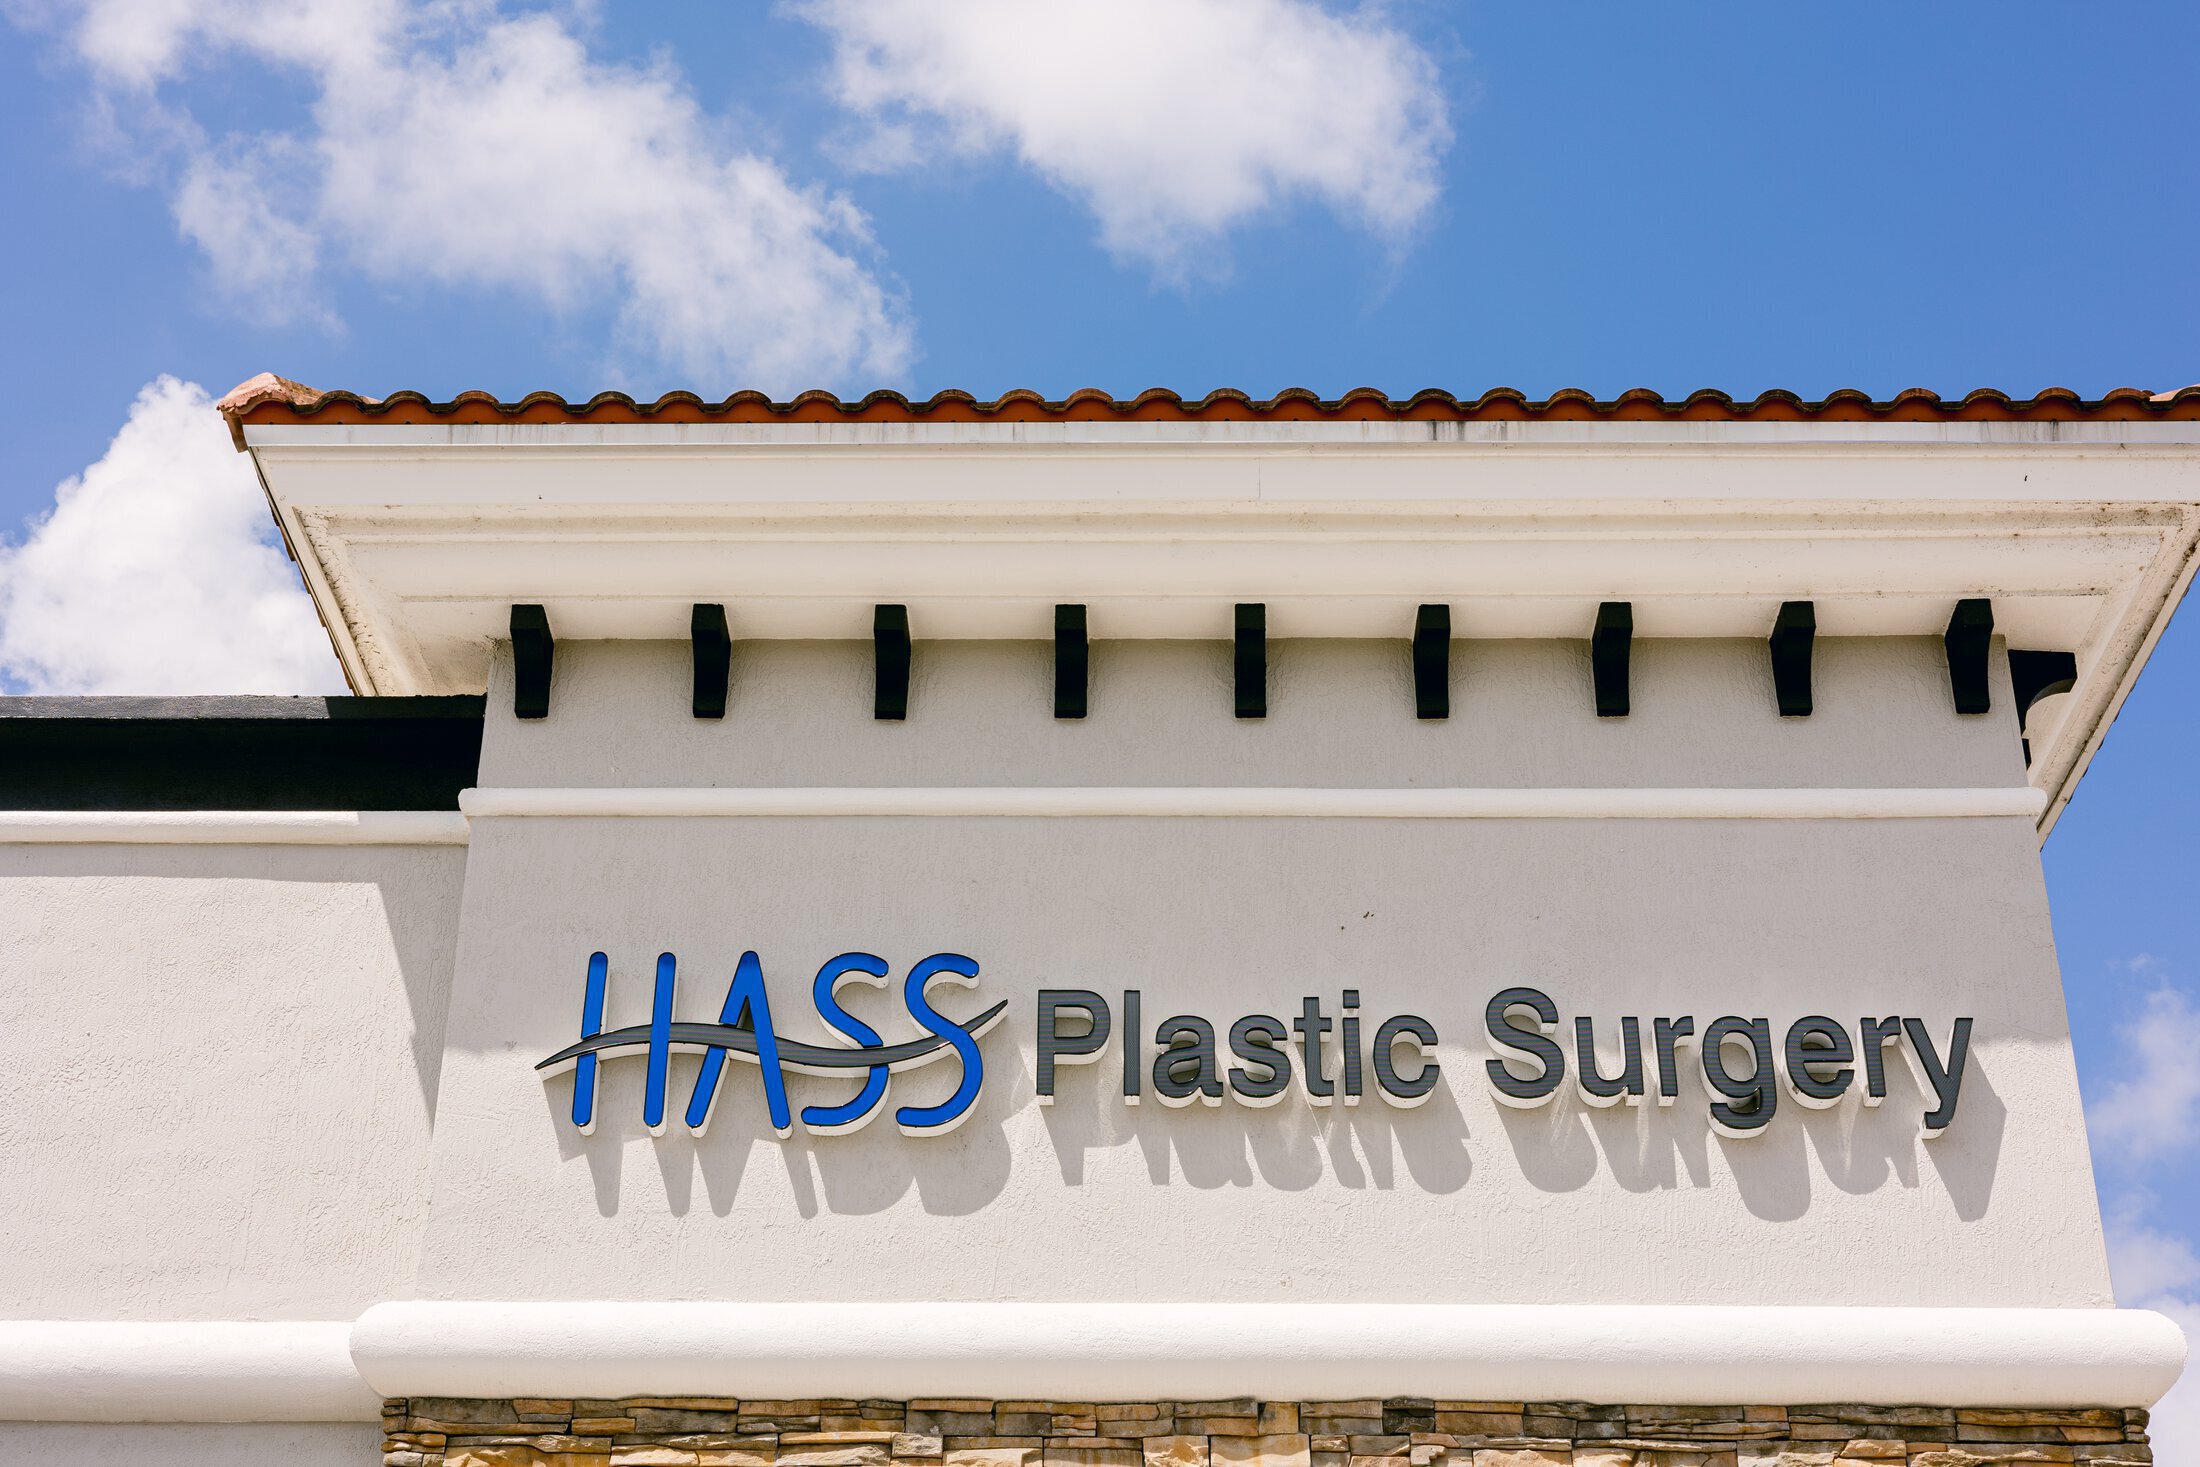 Hass plastic surgery office